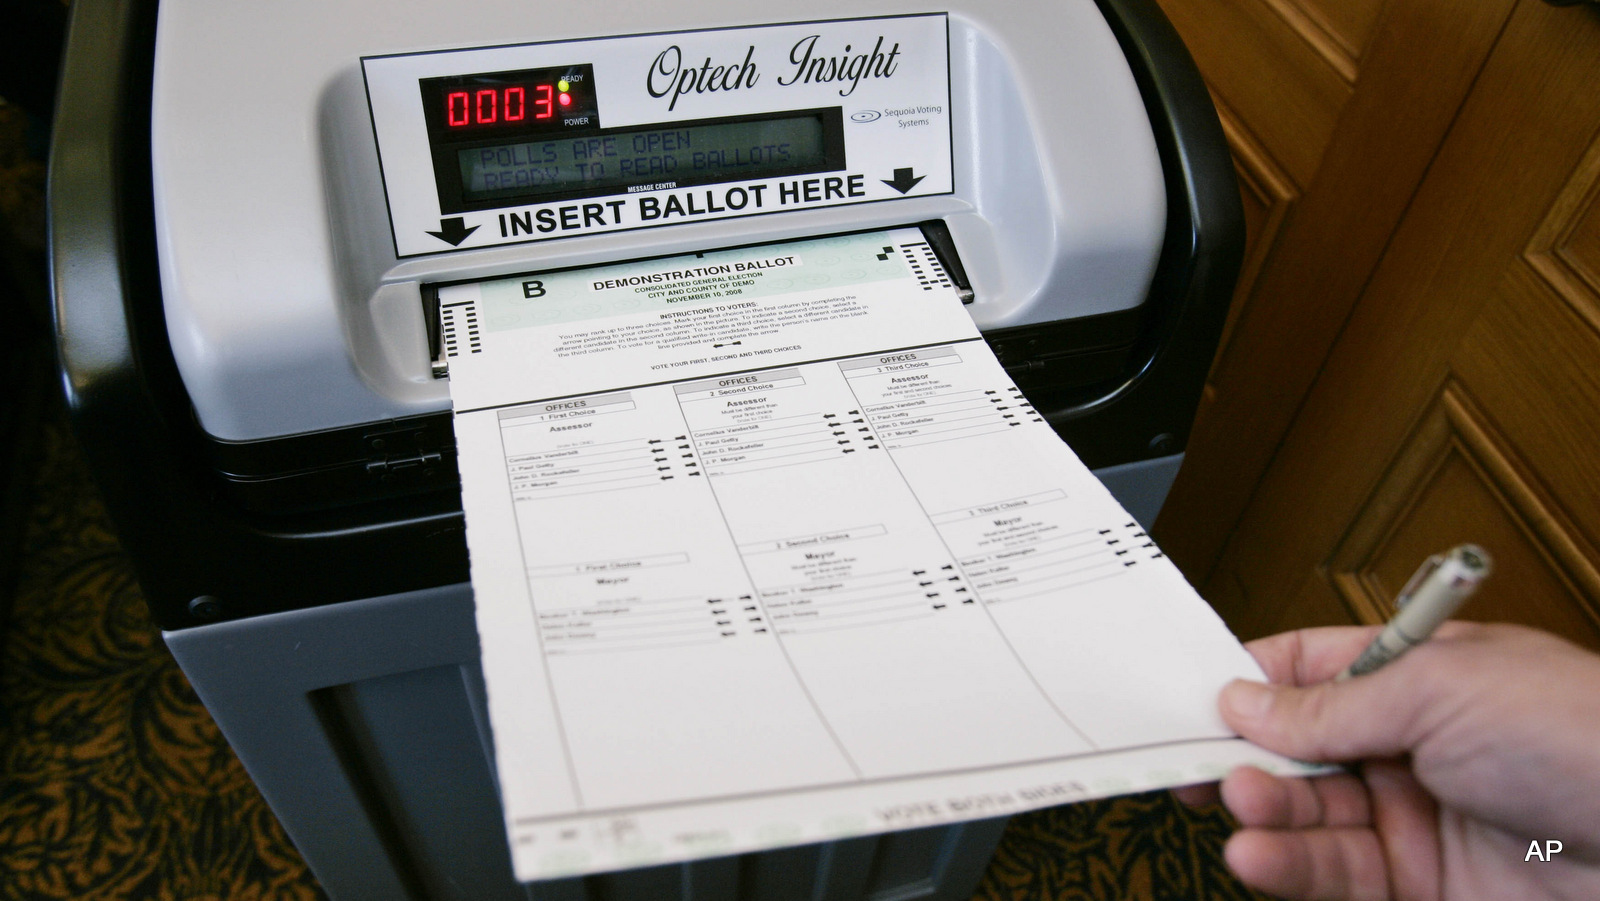 A sales executive with Sequoia Voting Systems demonstrates inserting a ballot into their electronic voting system for officials in San Francisco, Dec. 5, 2007